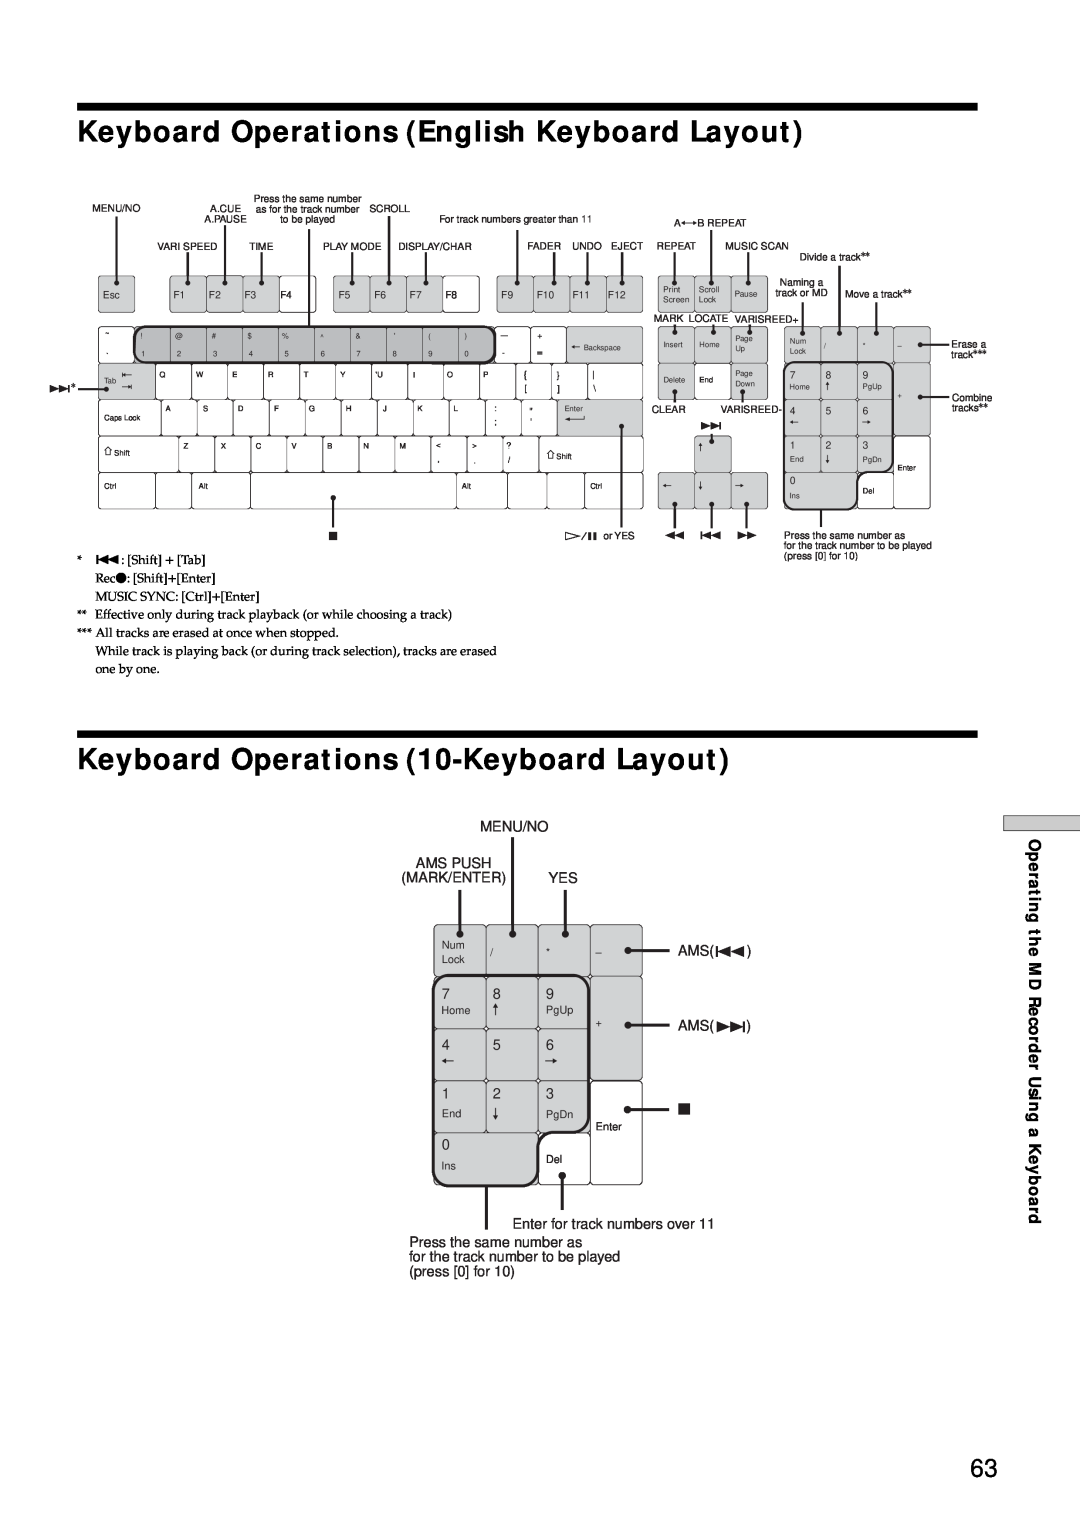 Sony MDS-E12 Keyboard Operations English Keyboard Layout, Keyboard Operations 10-KeyboardLayout, Operating the 